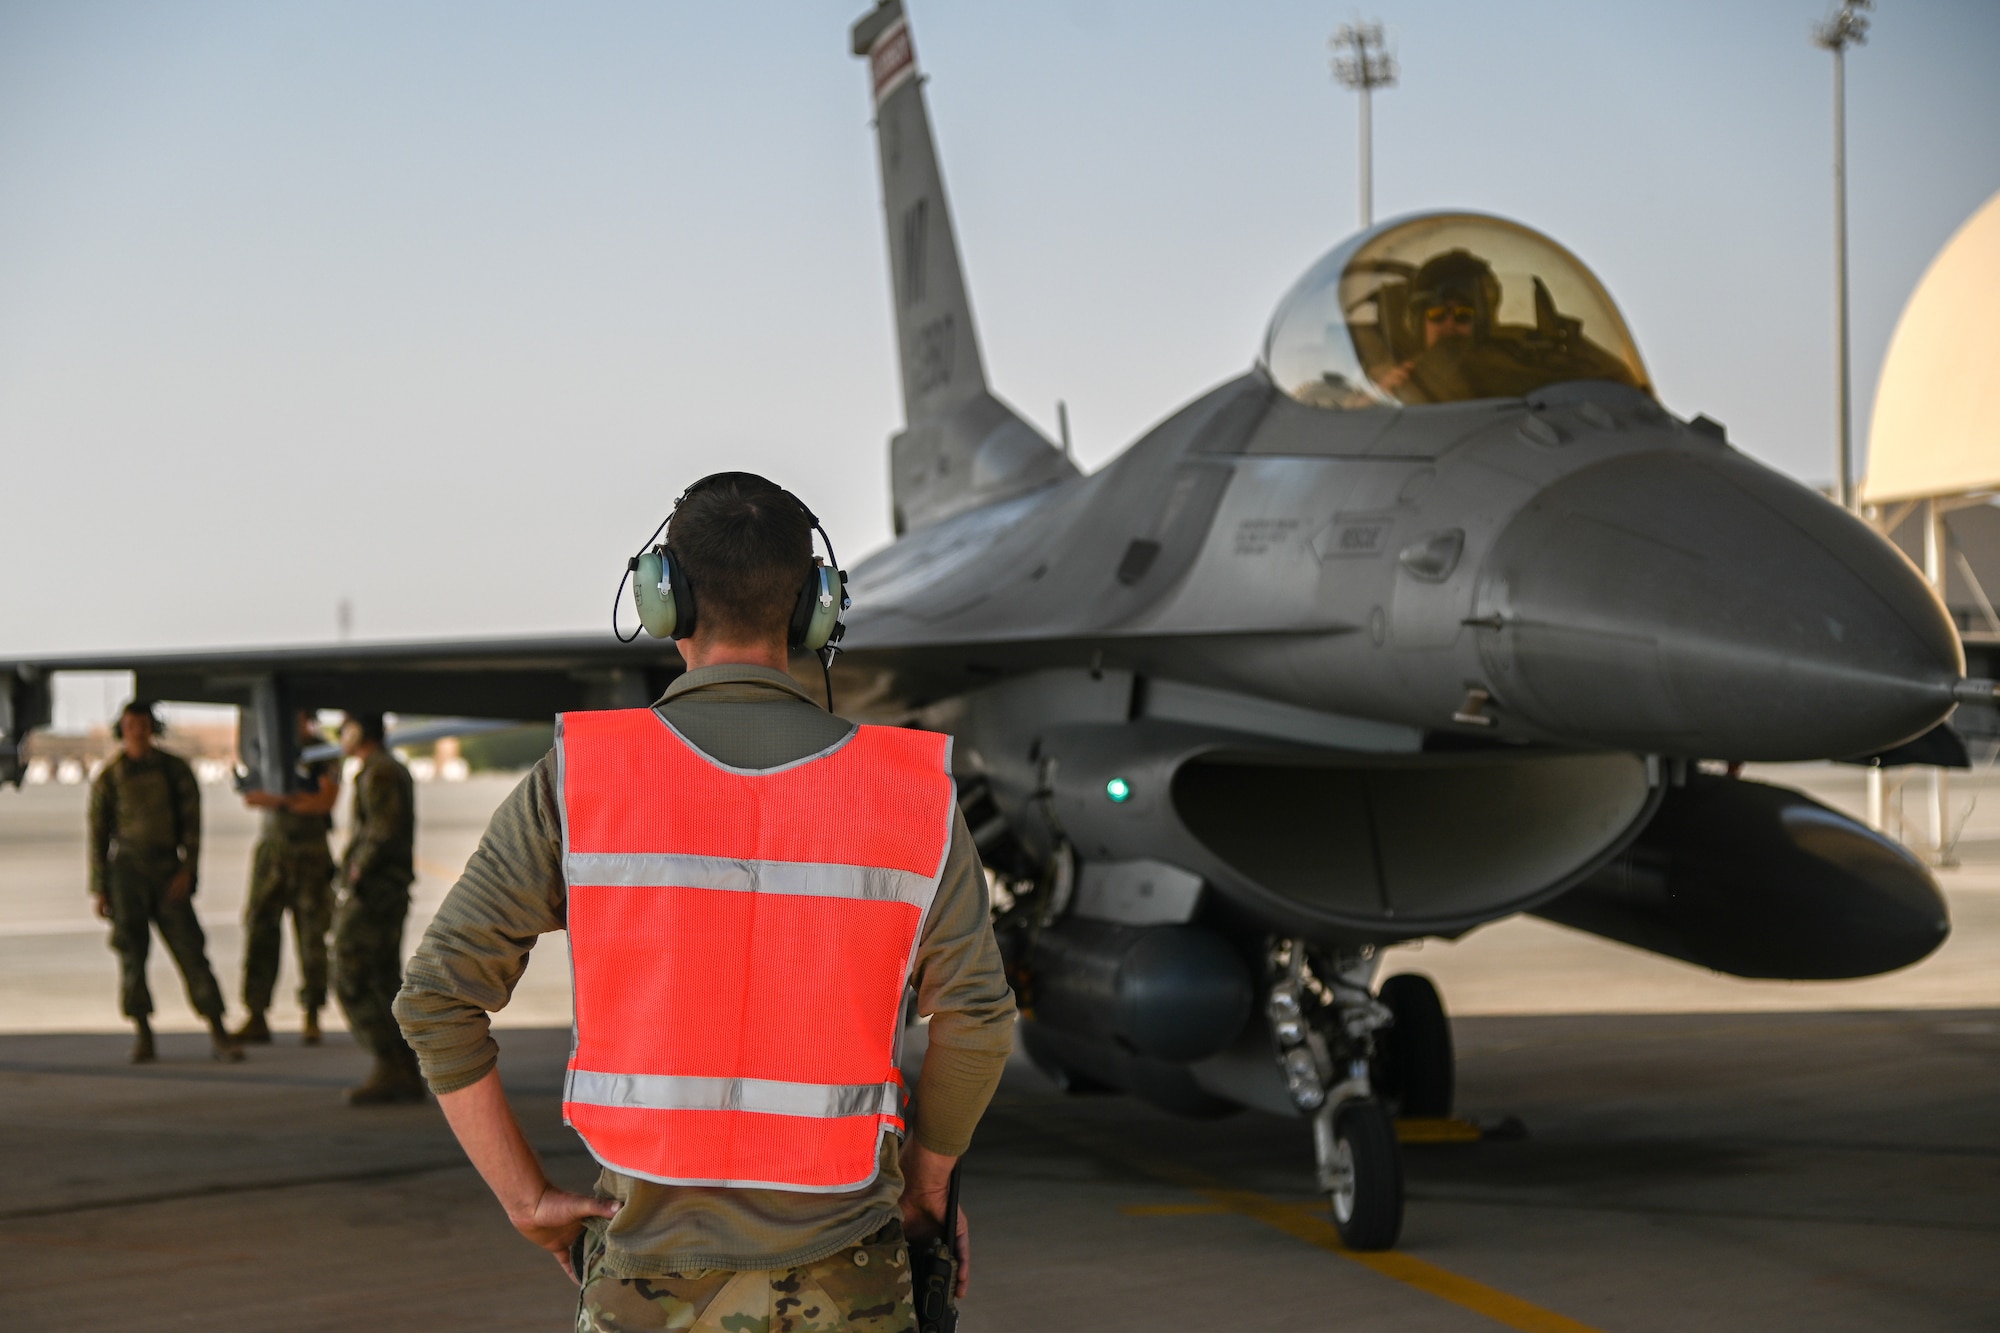 Tech. Sgt. Zechariah Postler, 176th Expeditionary Fighter Generation Squadron crew chief, takes part in an Integrated Combat Turn at Prince Sultan Air Base, Kingdom of Saudi Arabia, Nov. 18, 2021. An ICT is the quick rearming and refueling of a running jet to reduce the aircrew’s time on the ground and increases the 176th Expeditionary Fighter Squadron’s ability to conduct and sustain combat operations. (U.S. Air Force photo by Staff Sgt. Christina Graves)